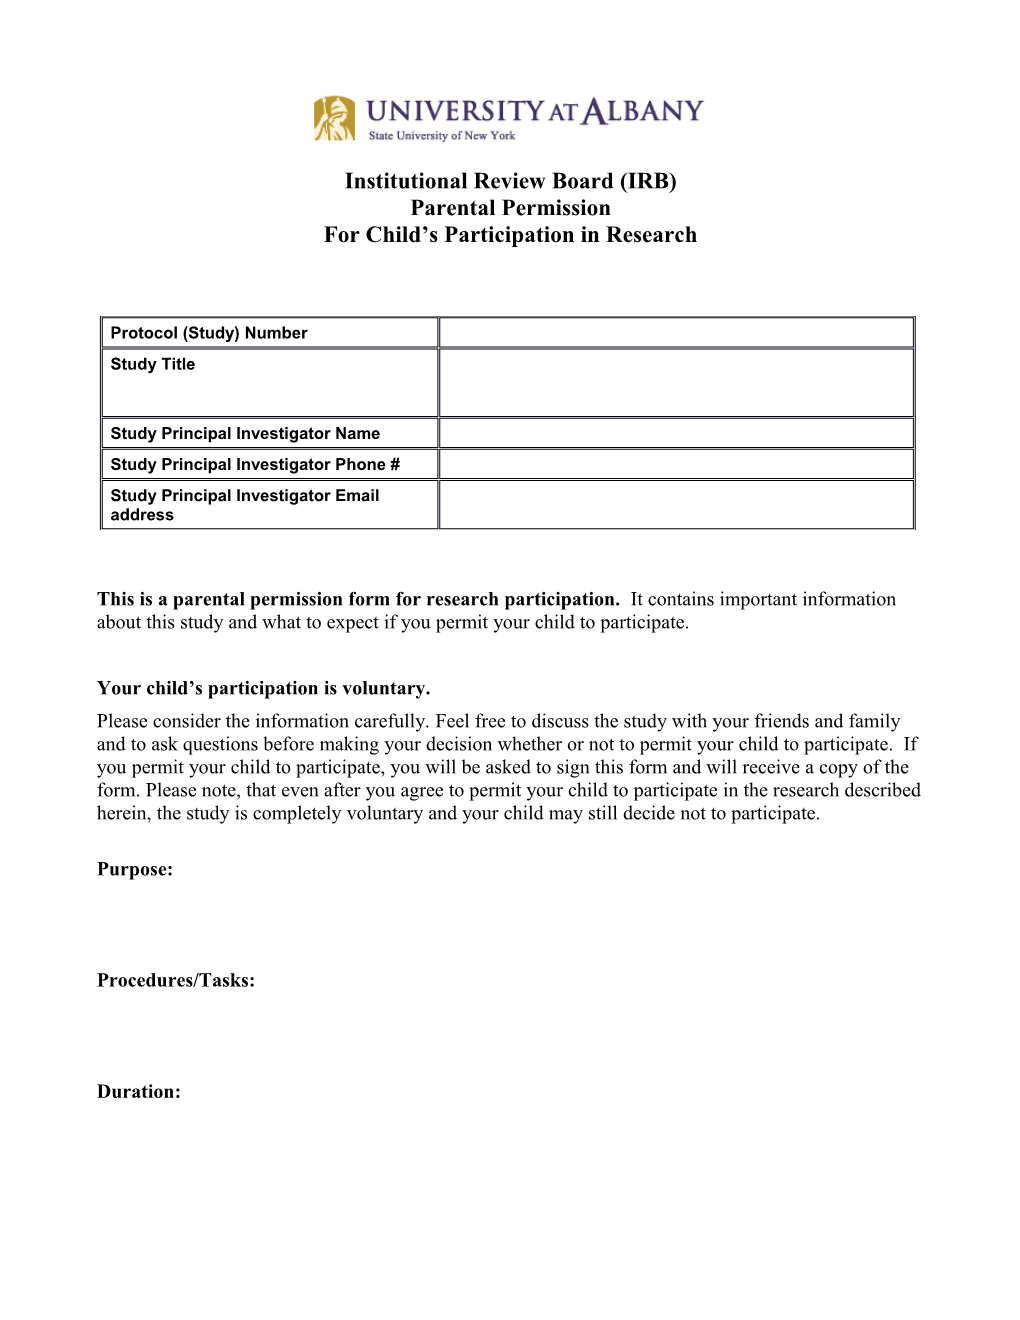 Institutional Review Board(IRB) Parental Permission